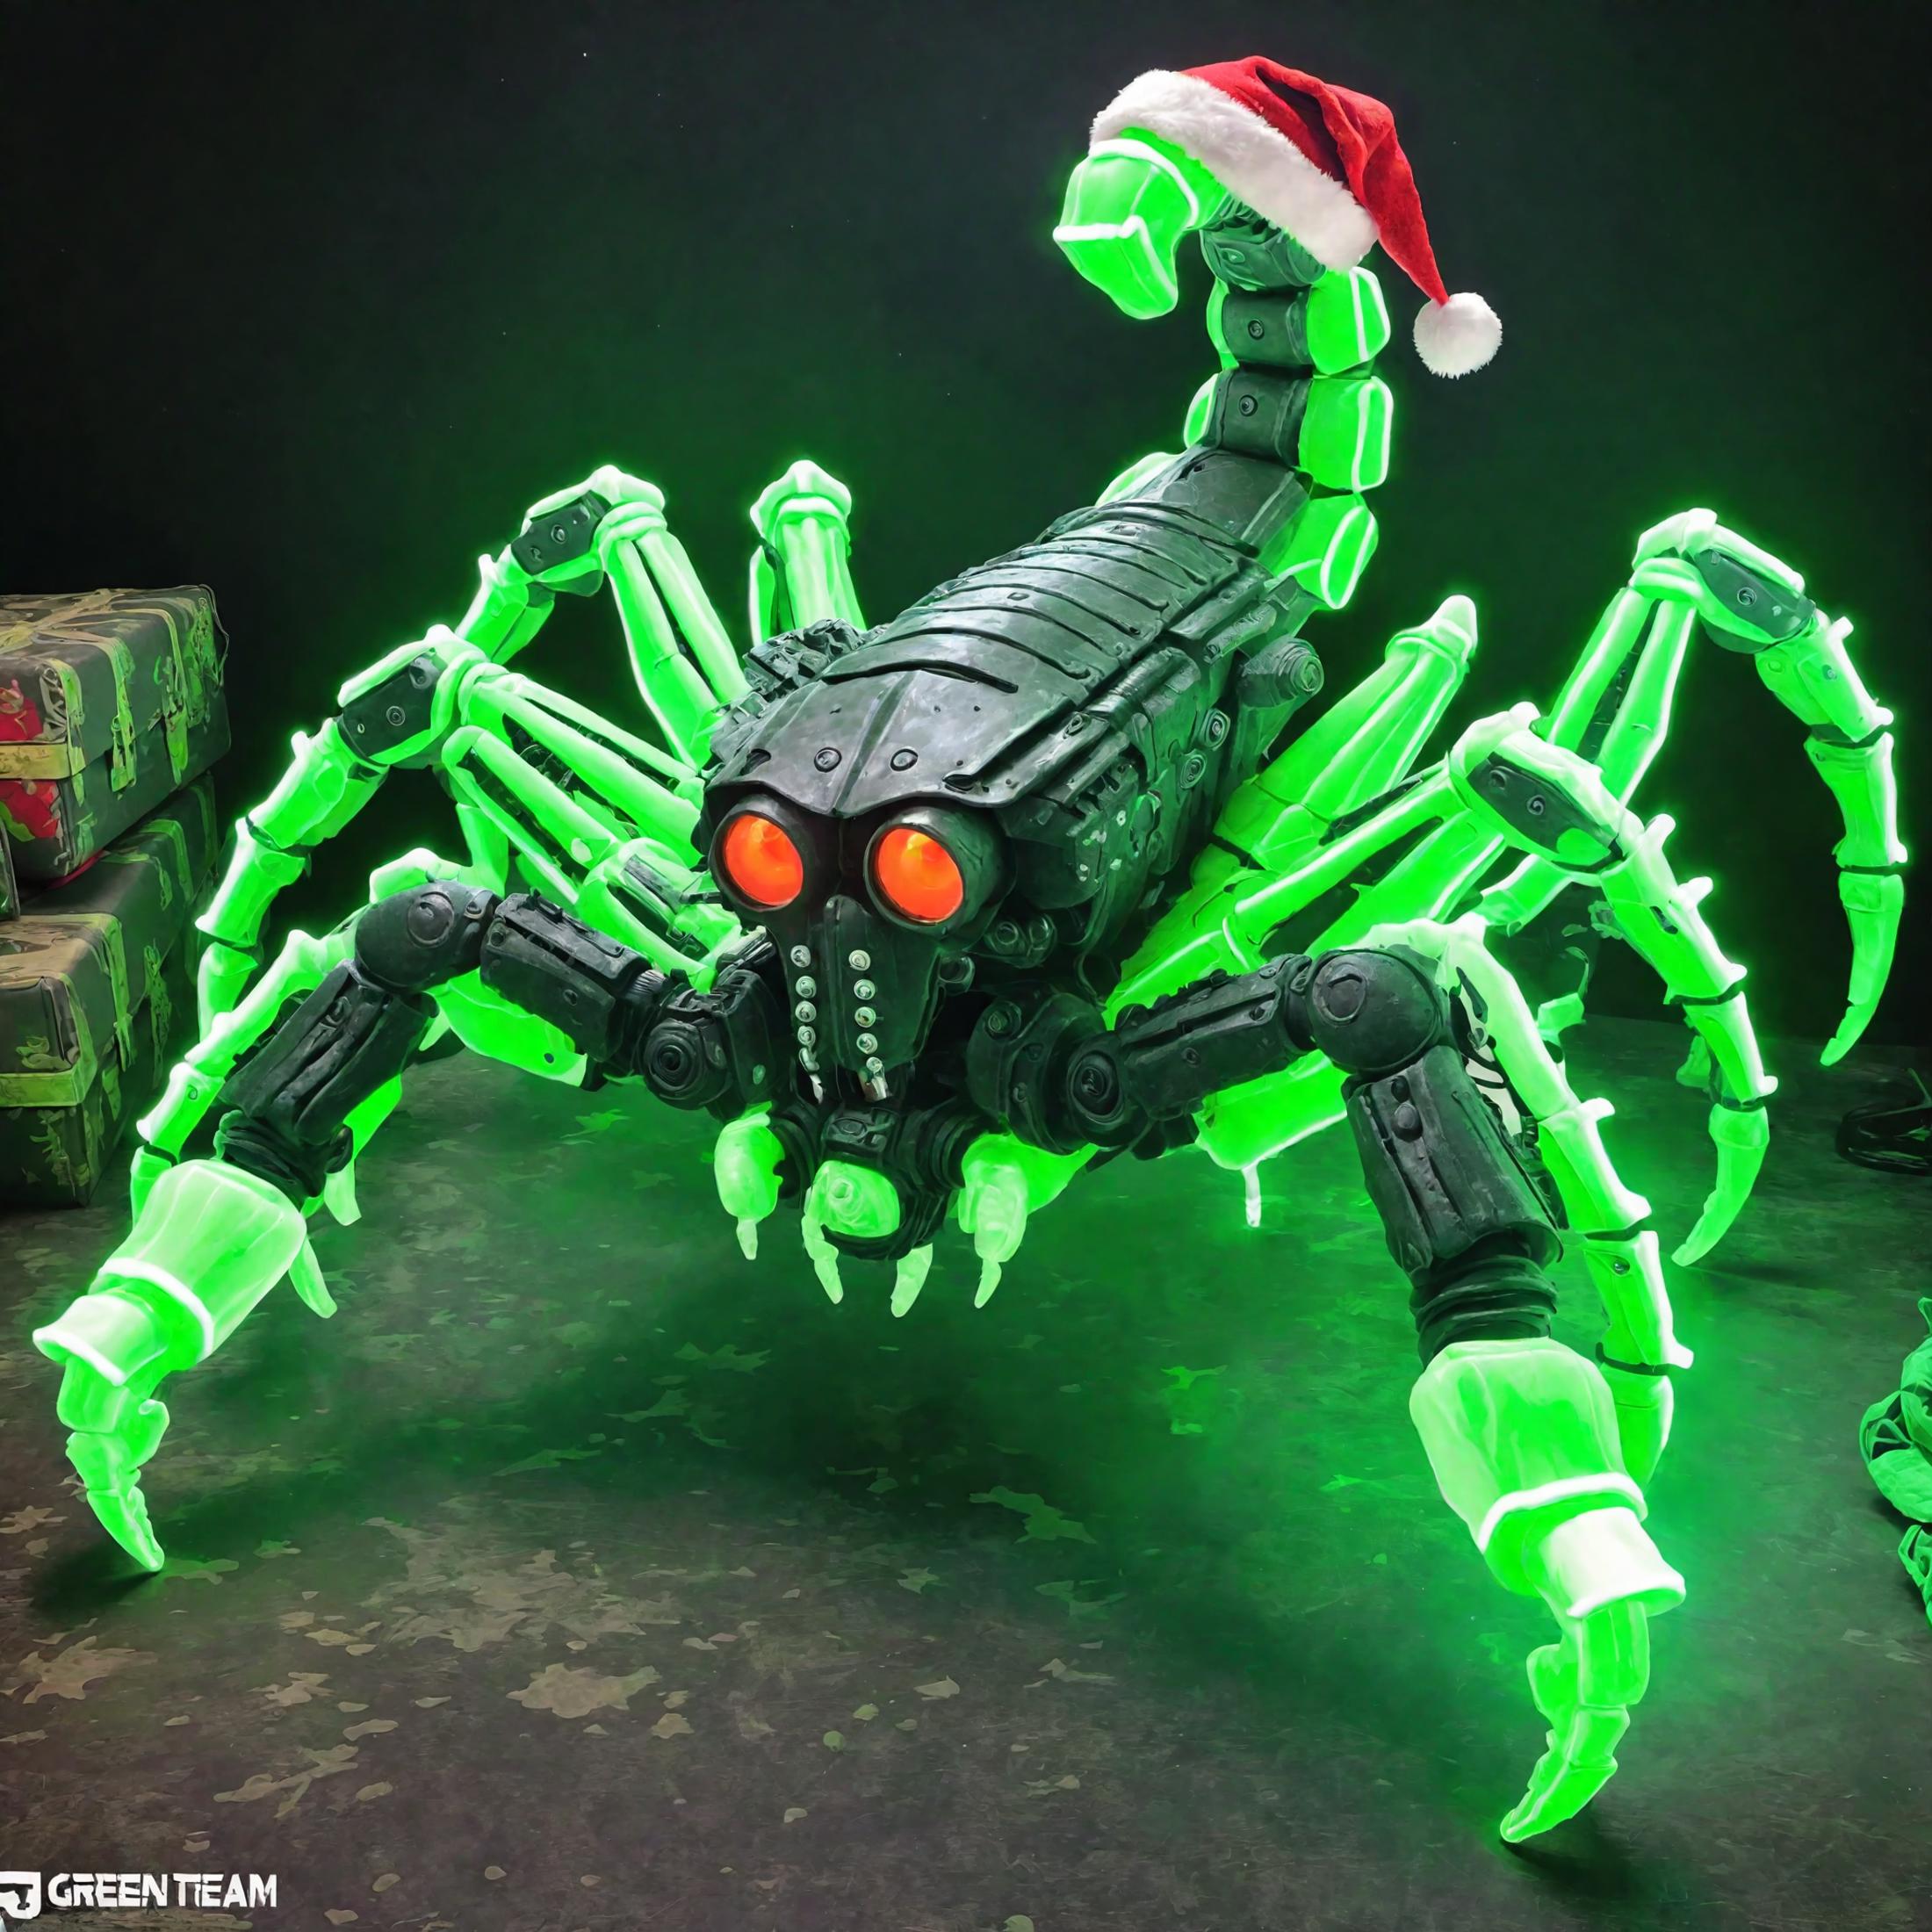 A mechanical green spider with a Santa hat on a black background.